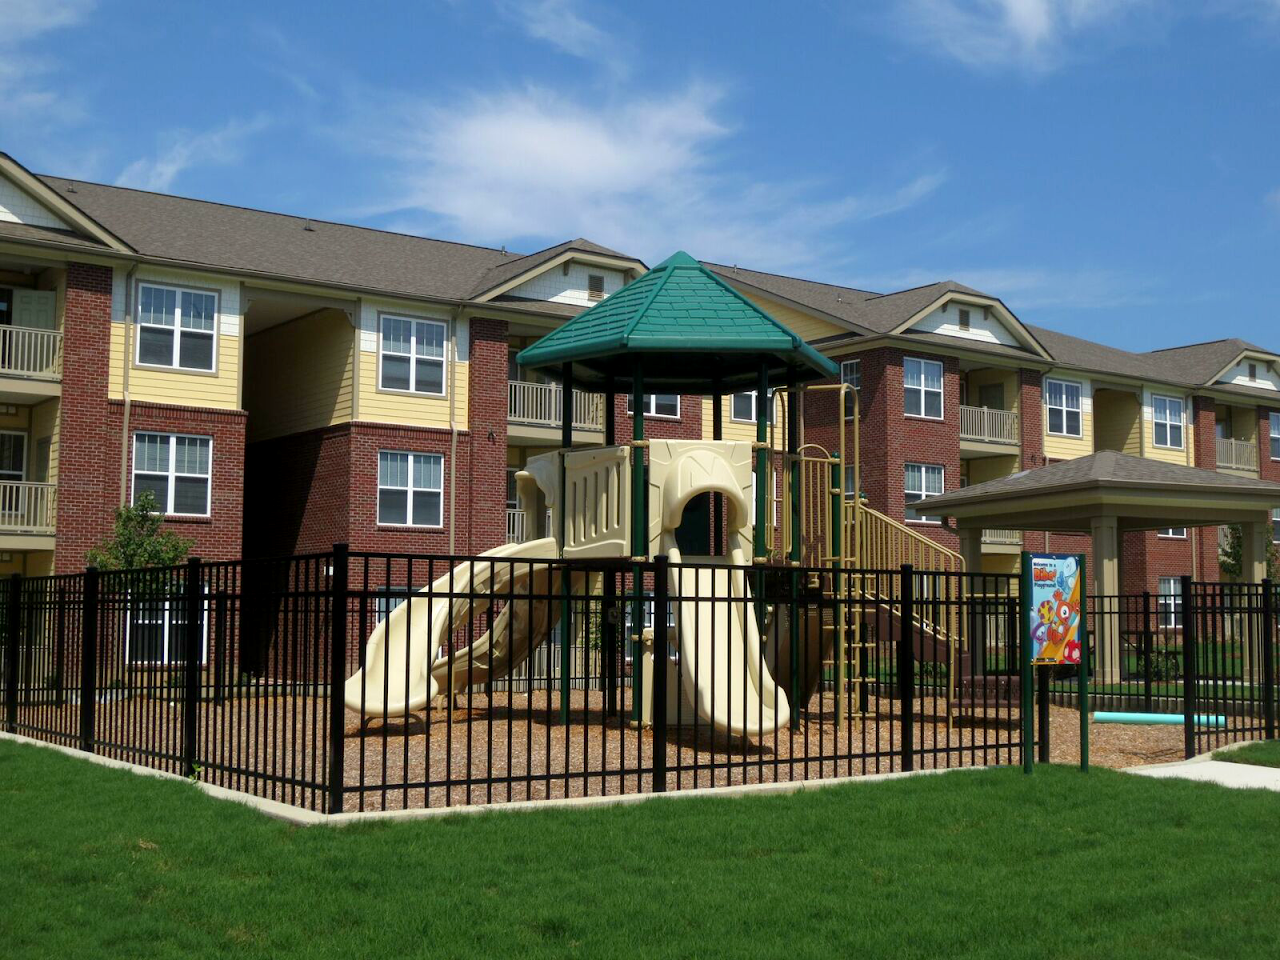 Photo of CEDARBROOK APARTMENTS. Affordable housing located at 819 WEST DEKALB STREET CAMDEN, SC 29020